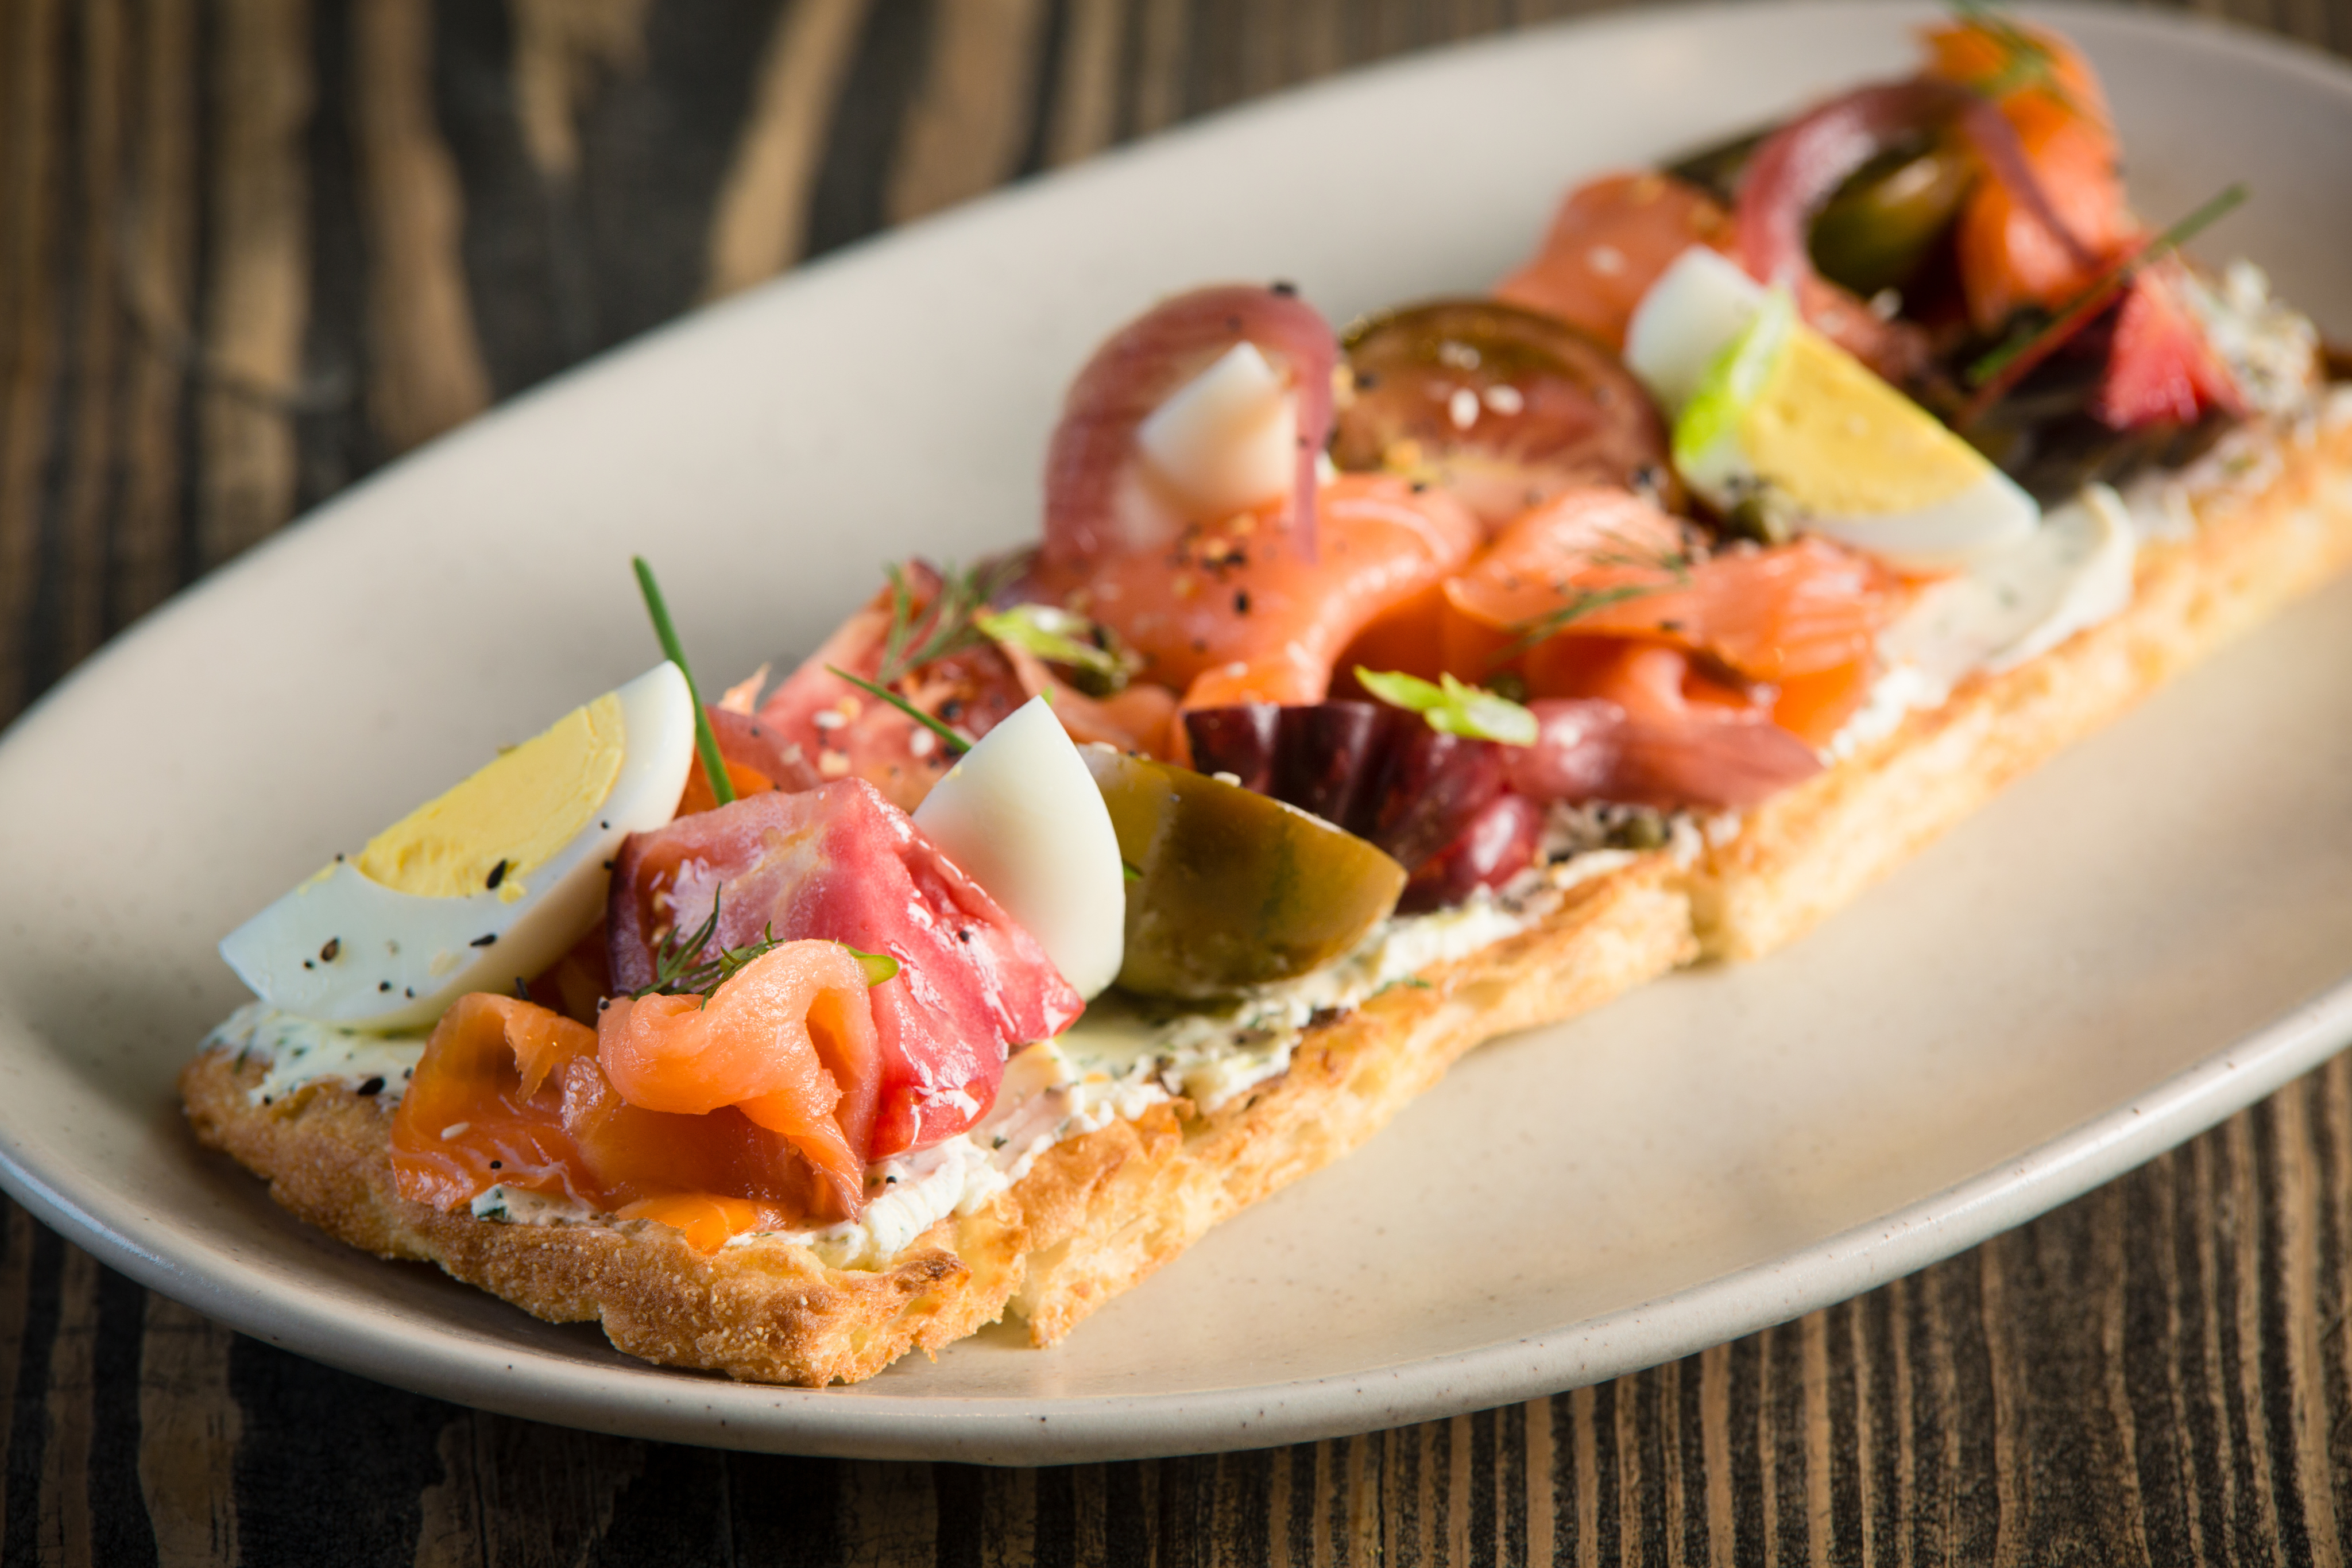 An oval plate holding a lavish open-faced sandwich topped with smoked salmon, sliced boiled eggs, tomatoes, red onions, and fresh herbs from locally-sourced food, presented on a rustic wooden table.